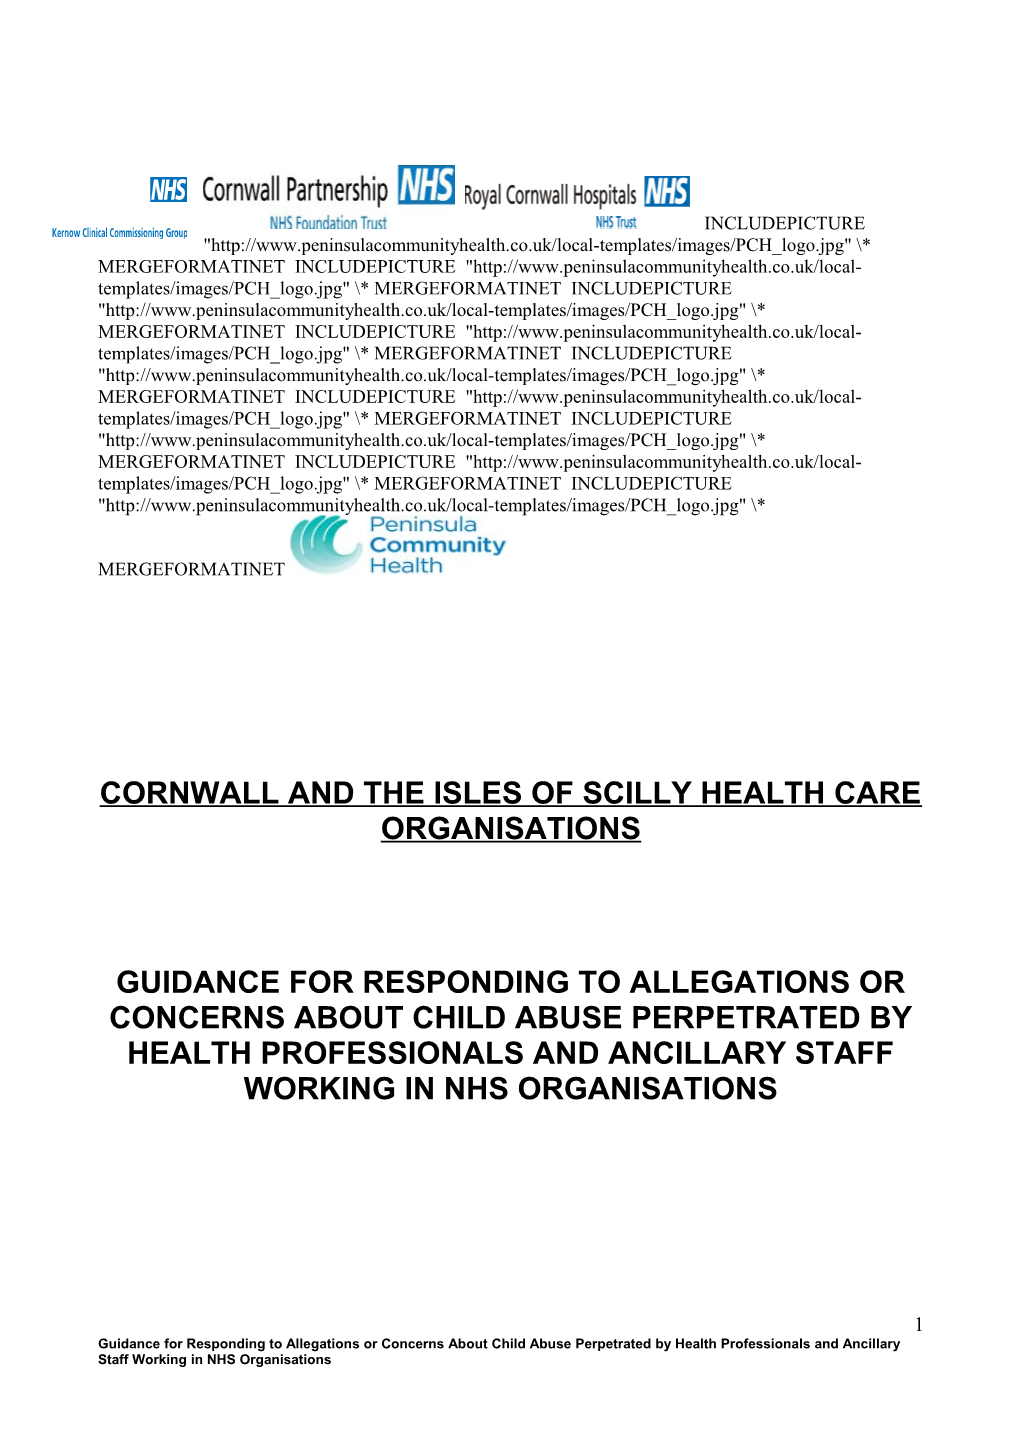 Cornwall and the Isles of Scilly Health Care Organisations